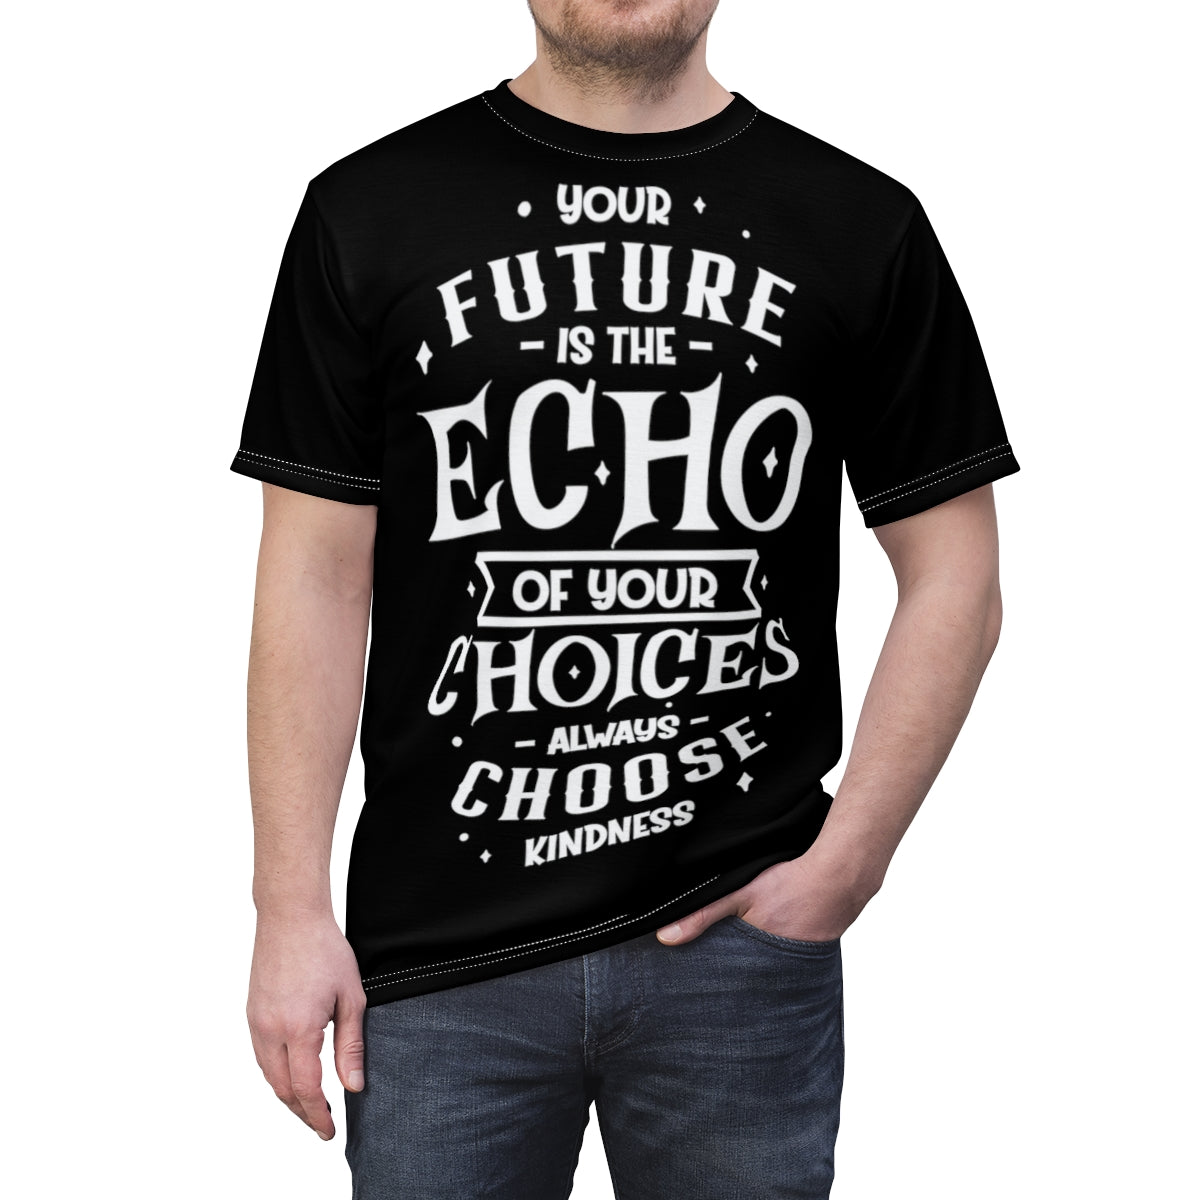 Unisex Echo: The Curse of the Blackwood Witches T-Shirt